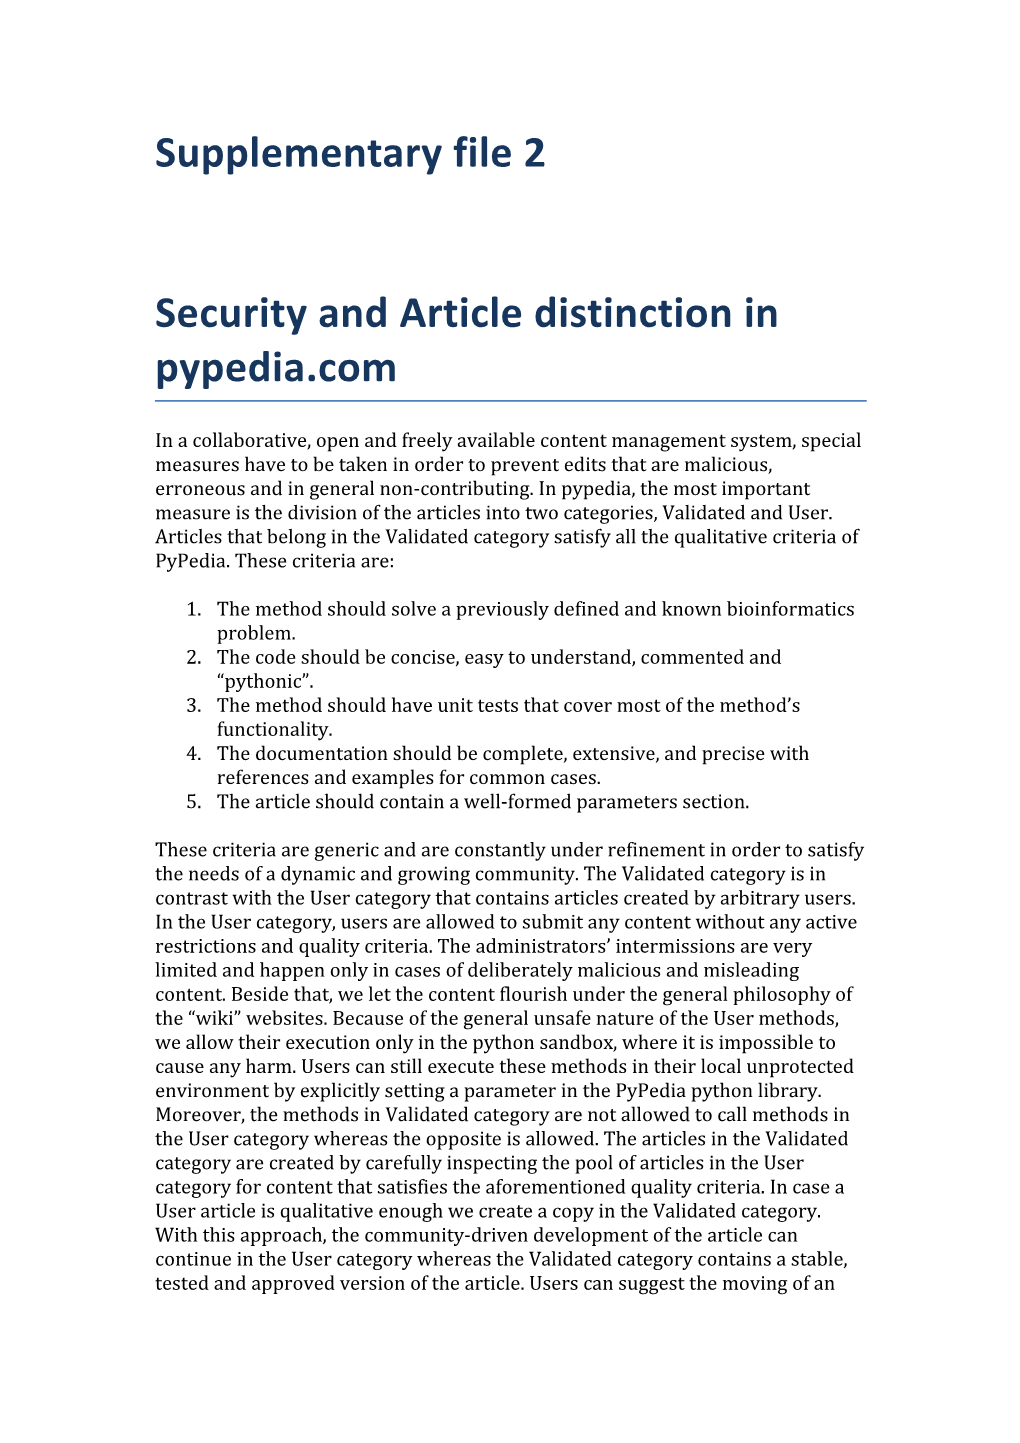 Security and Article Distinction in Pypedia.Com